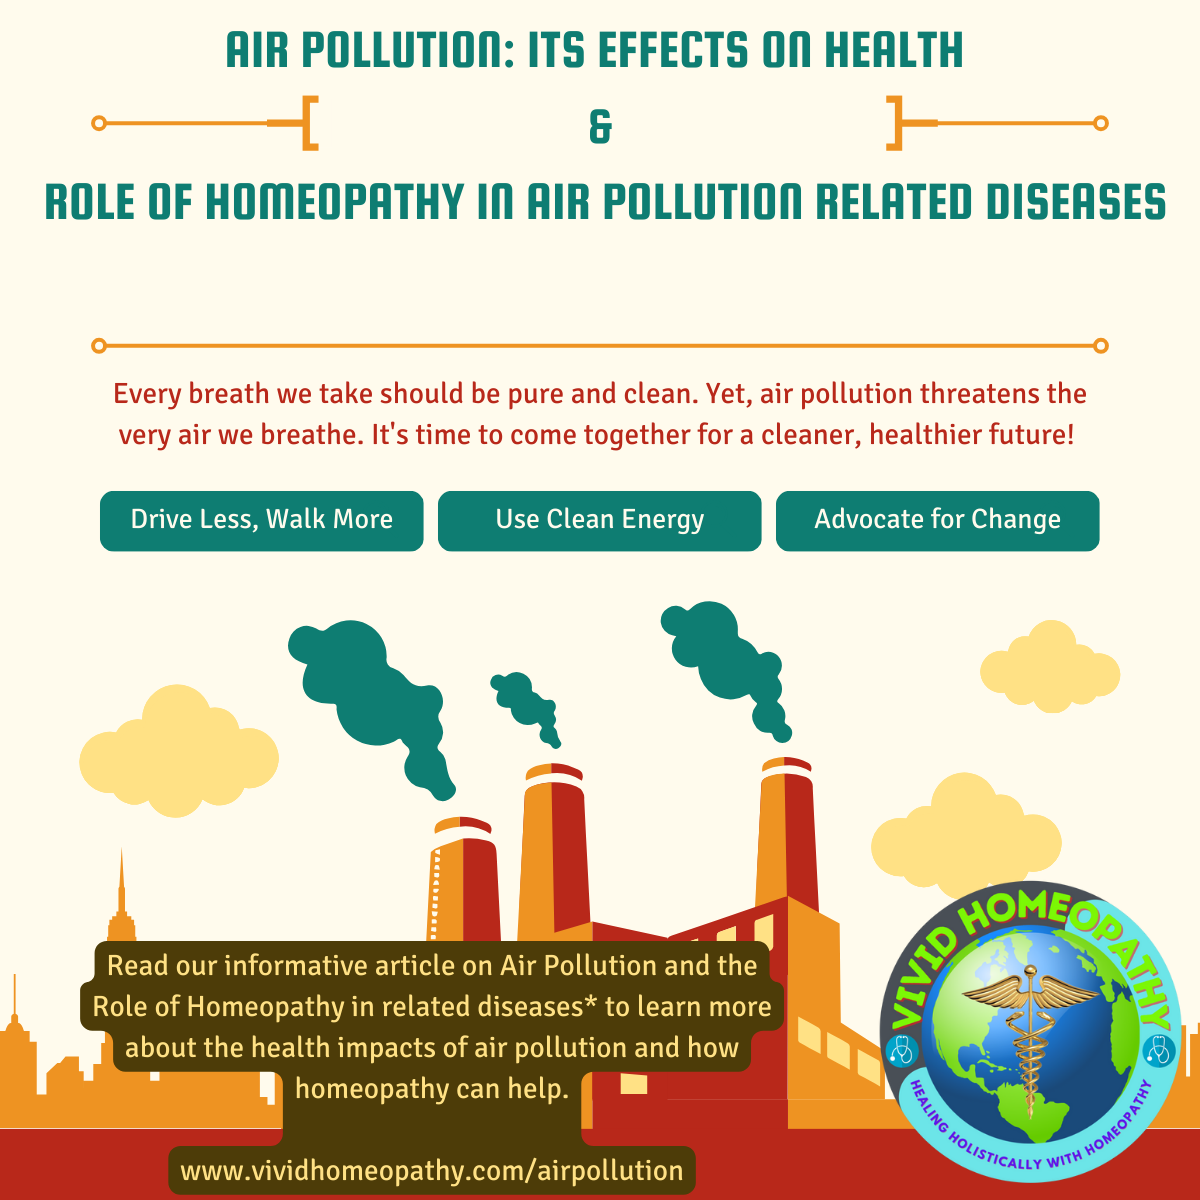 Air Pollution and Role of Homeopathy in related diseases